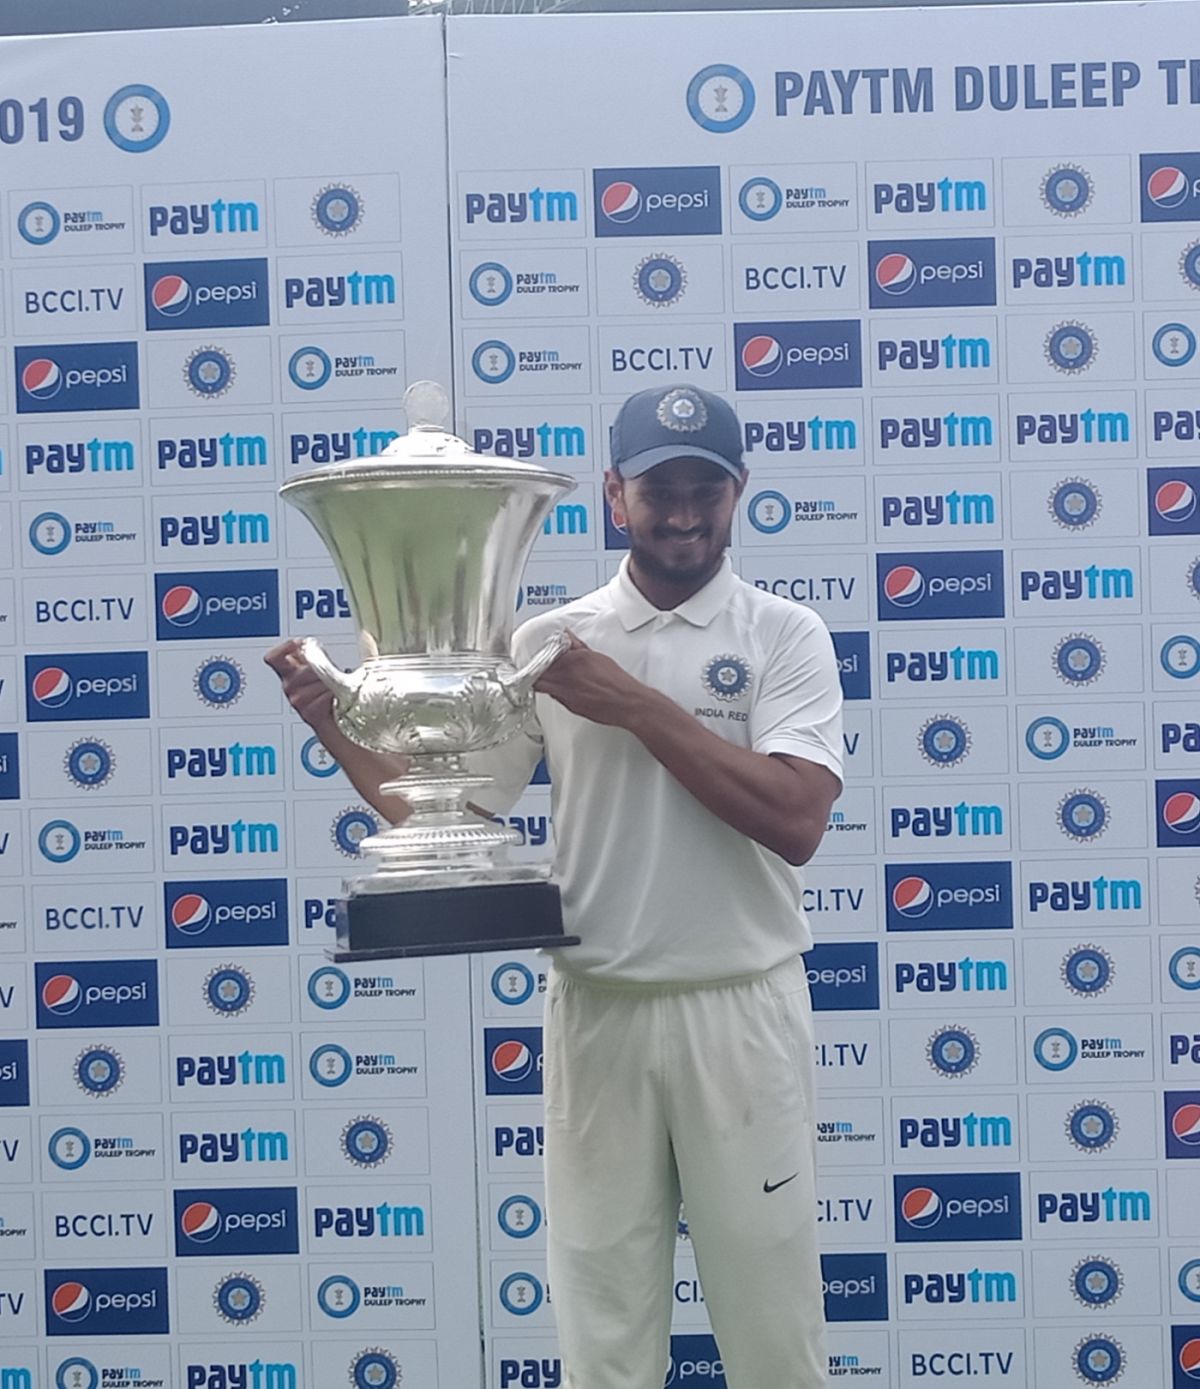 Priyank Panchal as a India Red Captain with the Duleep title on 7 September 2019